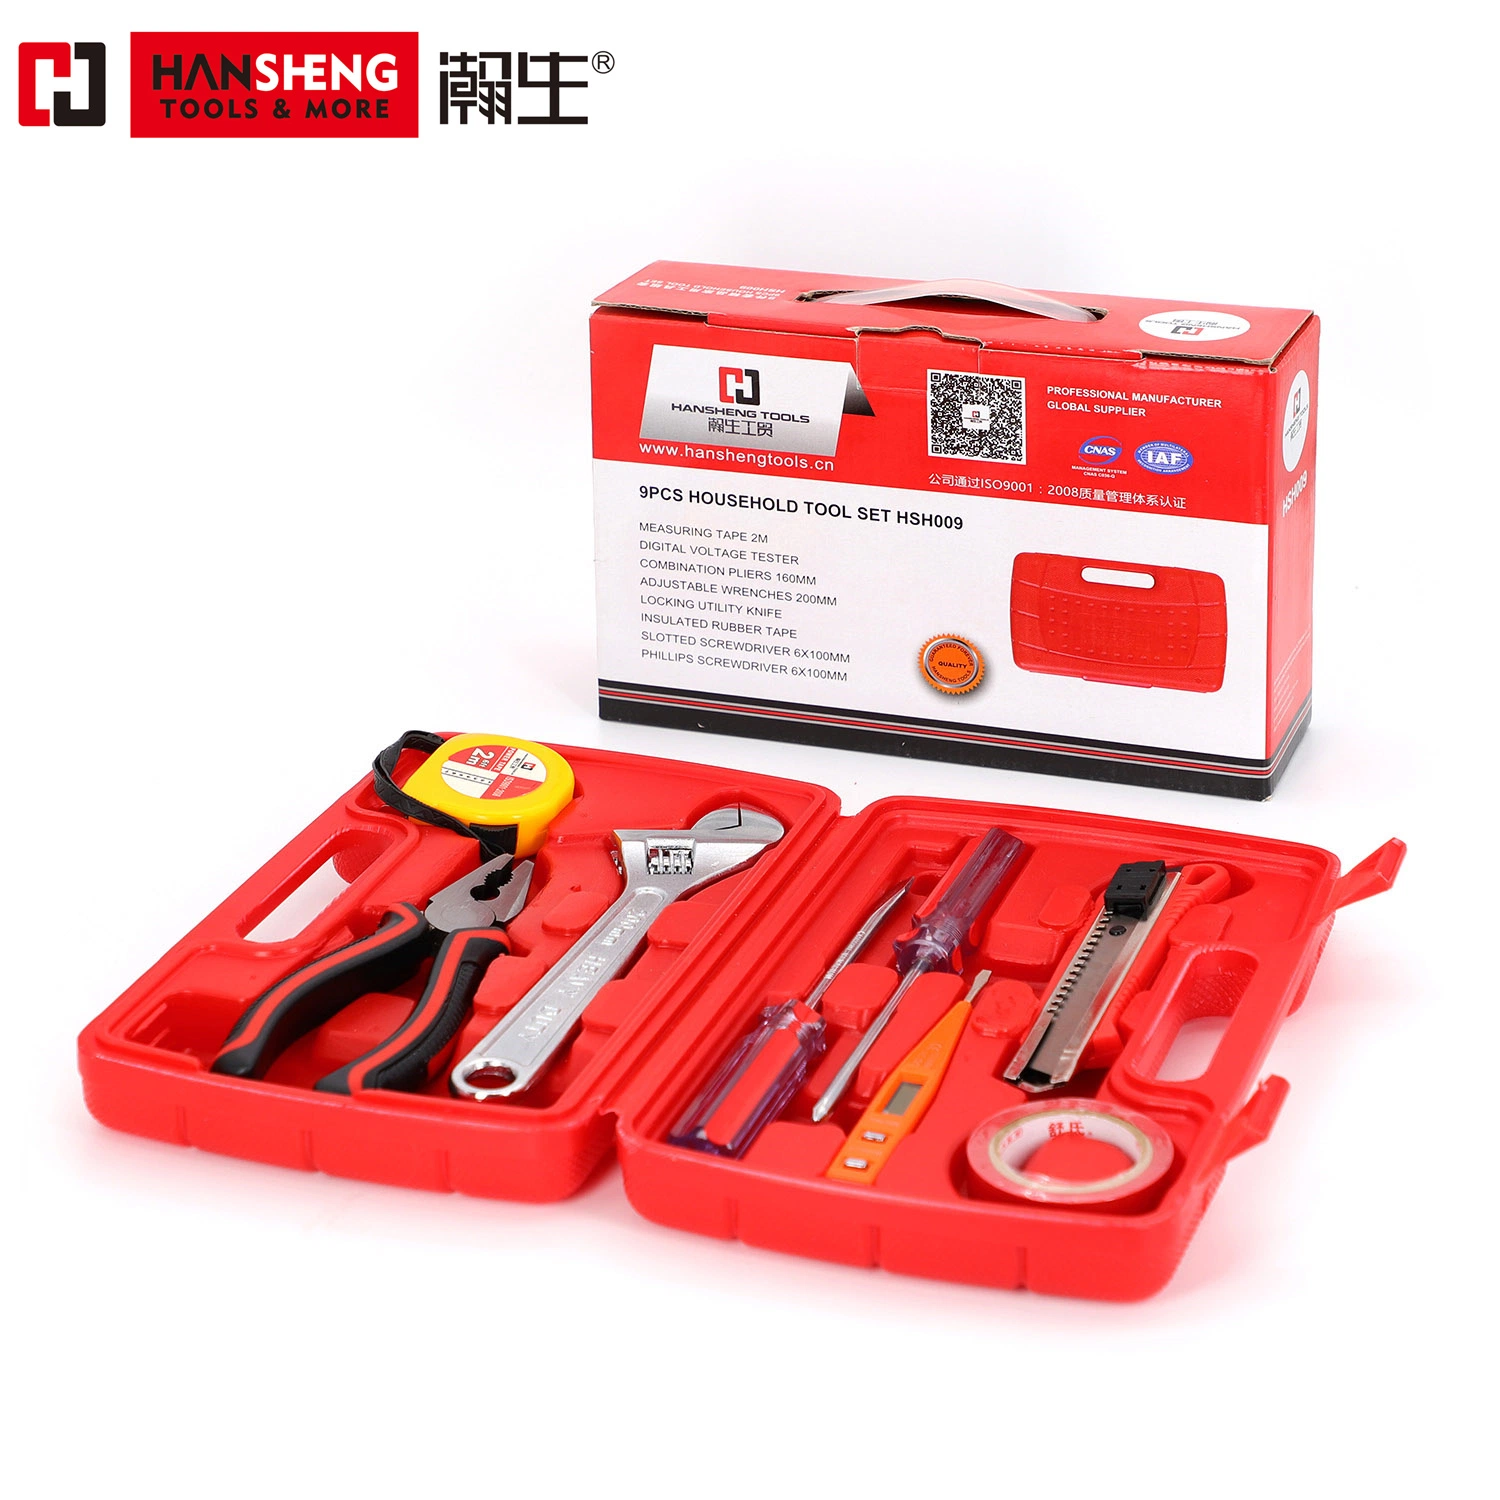 Professional Household Set Tools, Hand Tools, Hardware Tools, Plastic Toolbox, Combination, Set, Gift Tools, Pliers, Wire Clamp, Hammer, Wrench, Snips, 8 Set